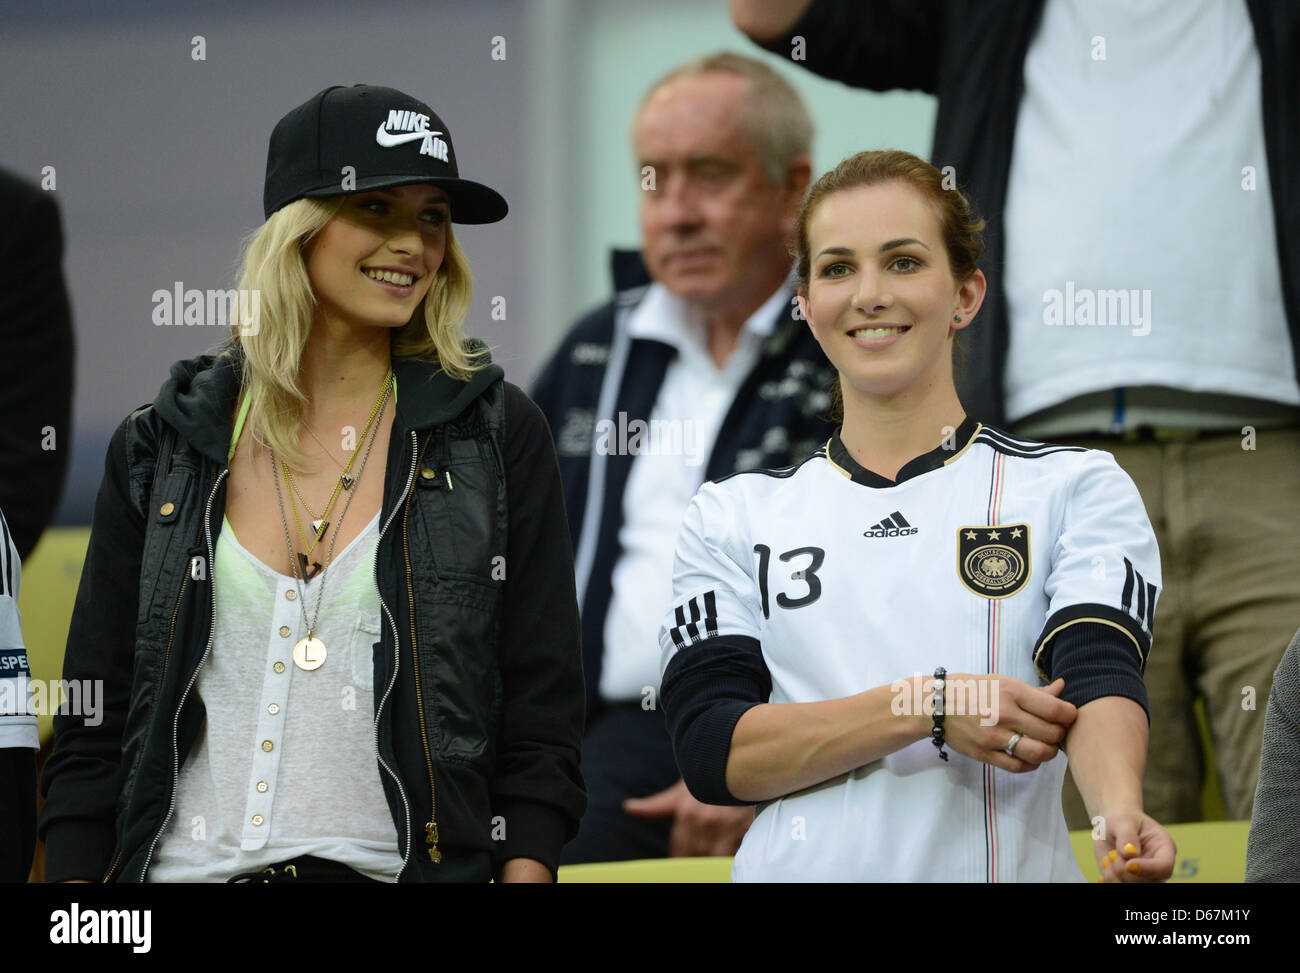 Lena Gercke, the girlfriend of Sami Khedira and Lisa Mueller, the wife of Mueller, on the stand prior to the EURO 2012 quarter-final soccer match vs Greece at